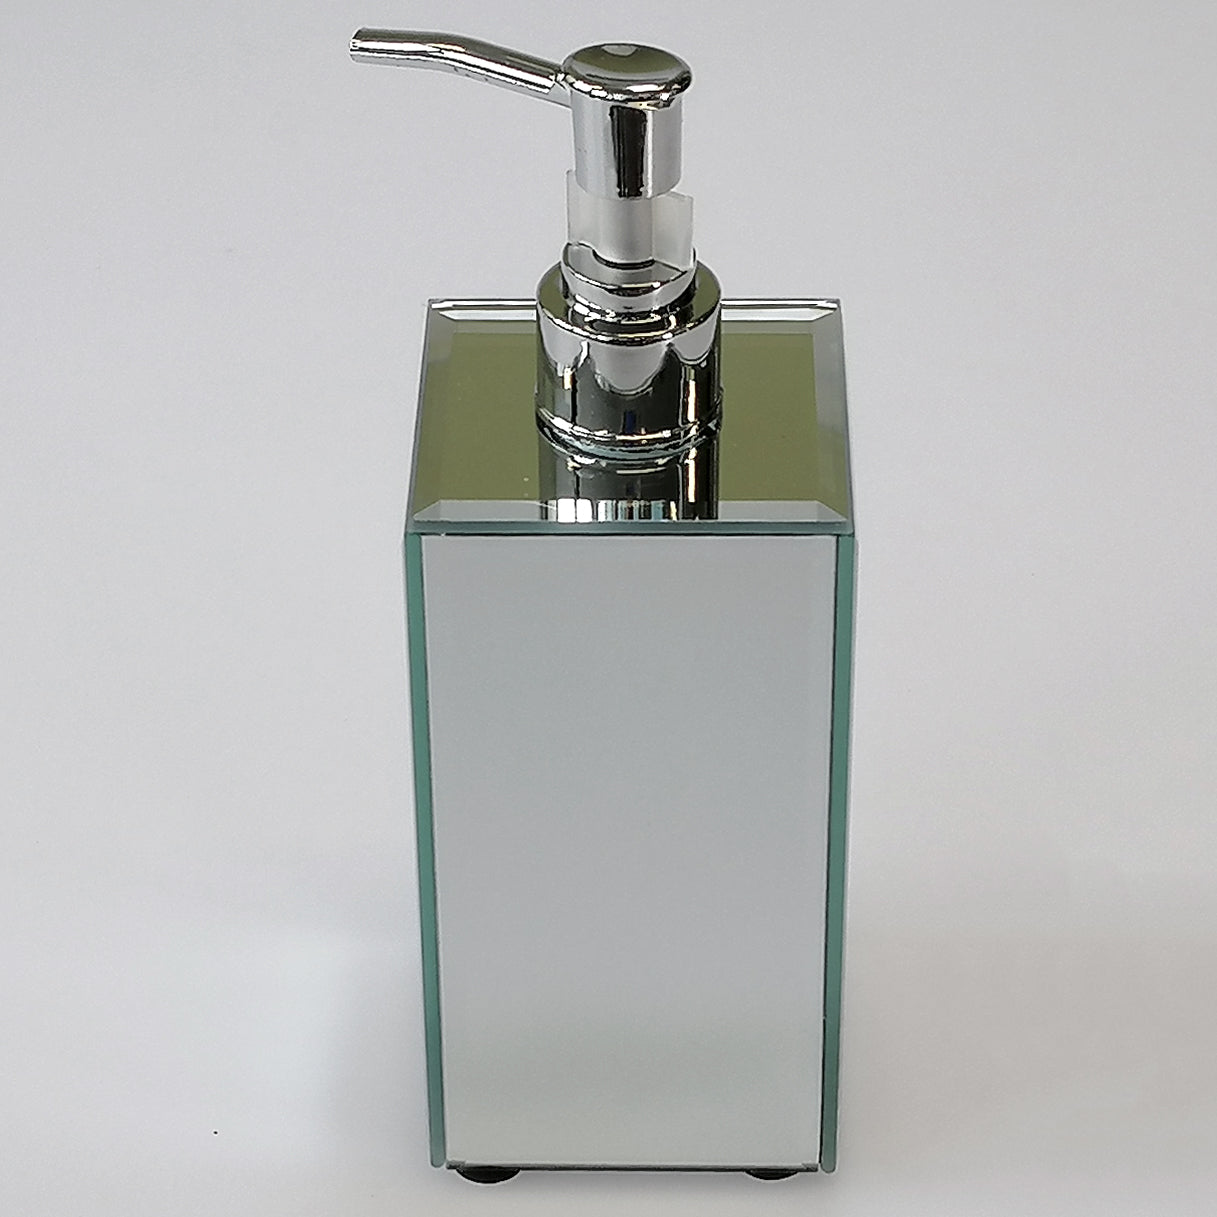 Crushed Glass-Look Soap Dispenser